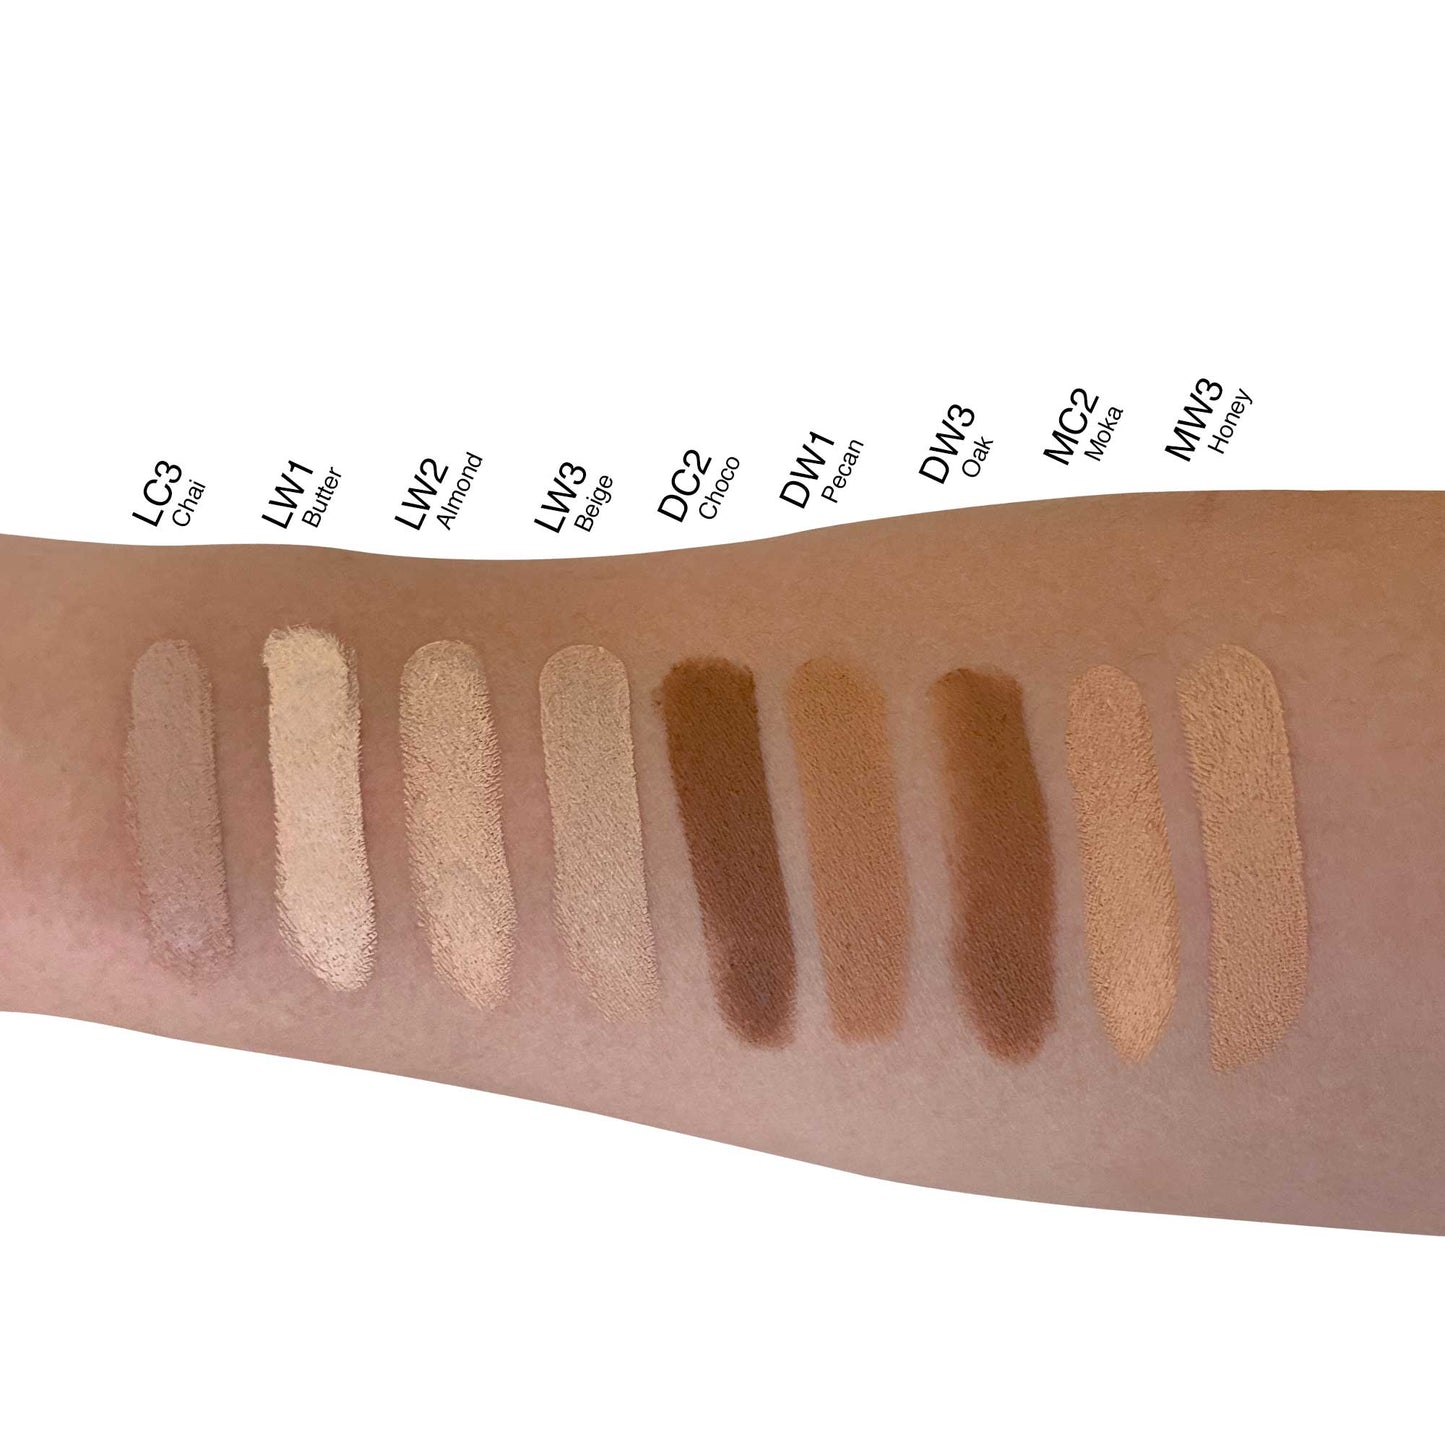 Different shades of conceal foundation shown on arm: Creme Concealer Stick Beige, a range of colors for flawless coverage.